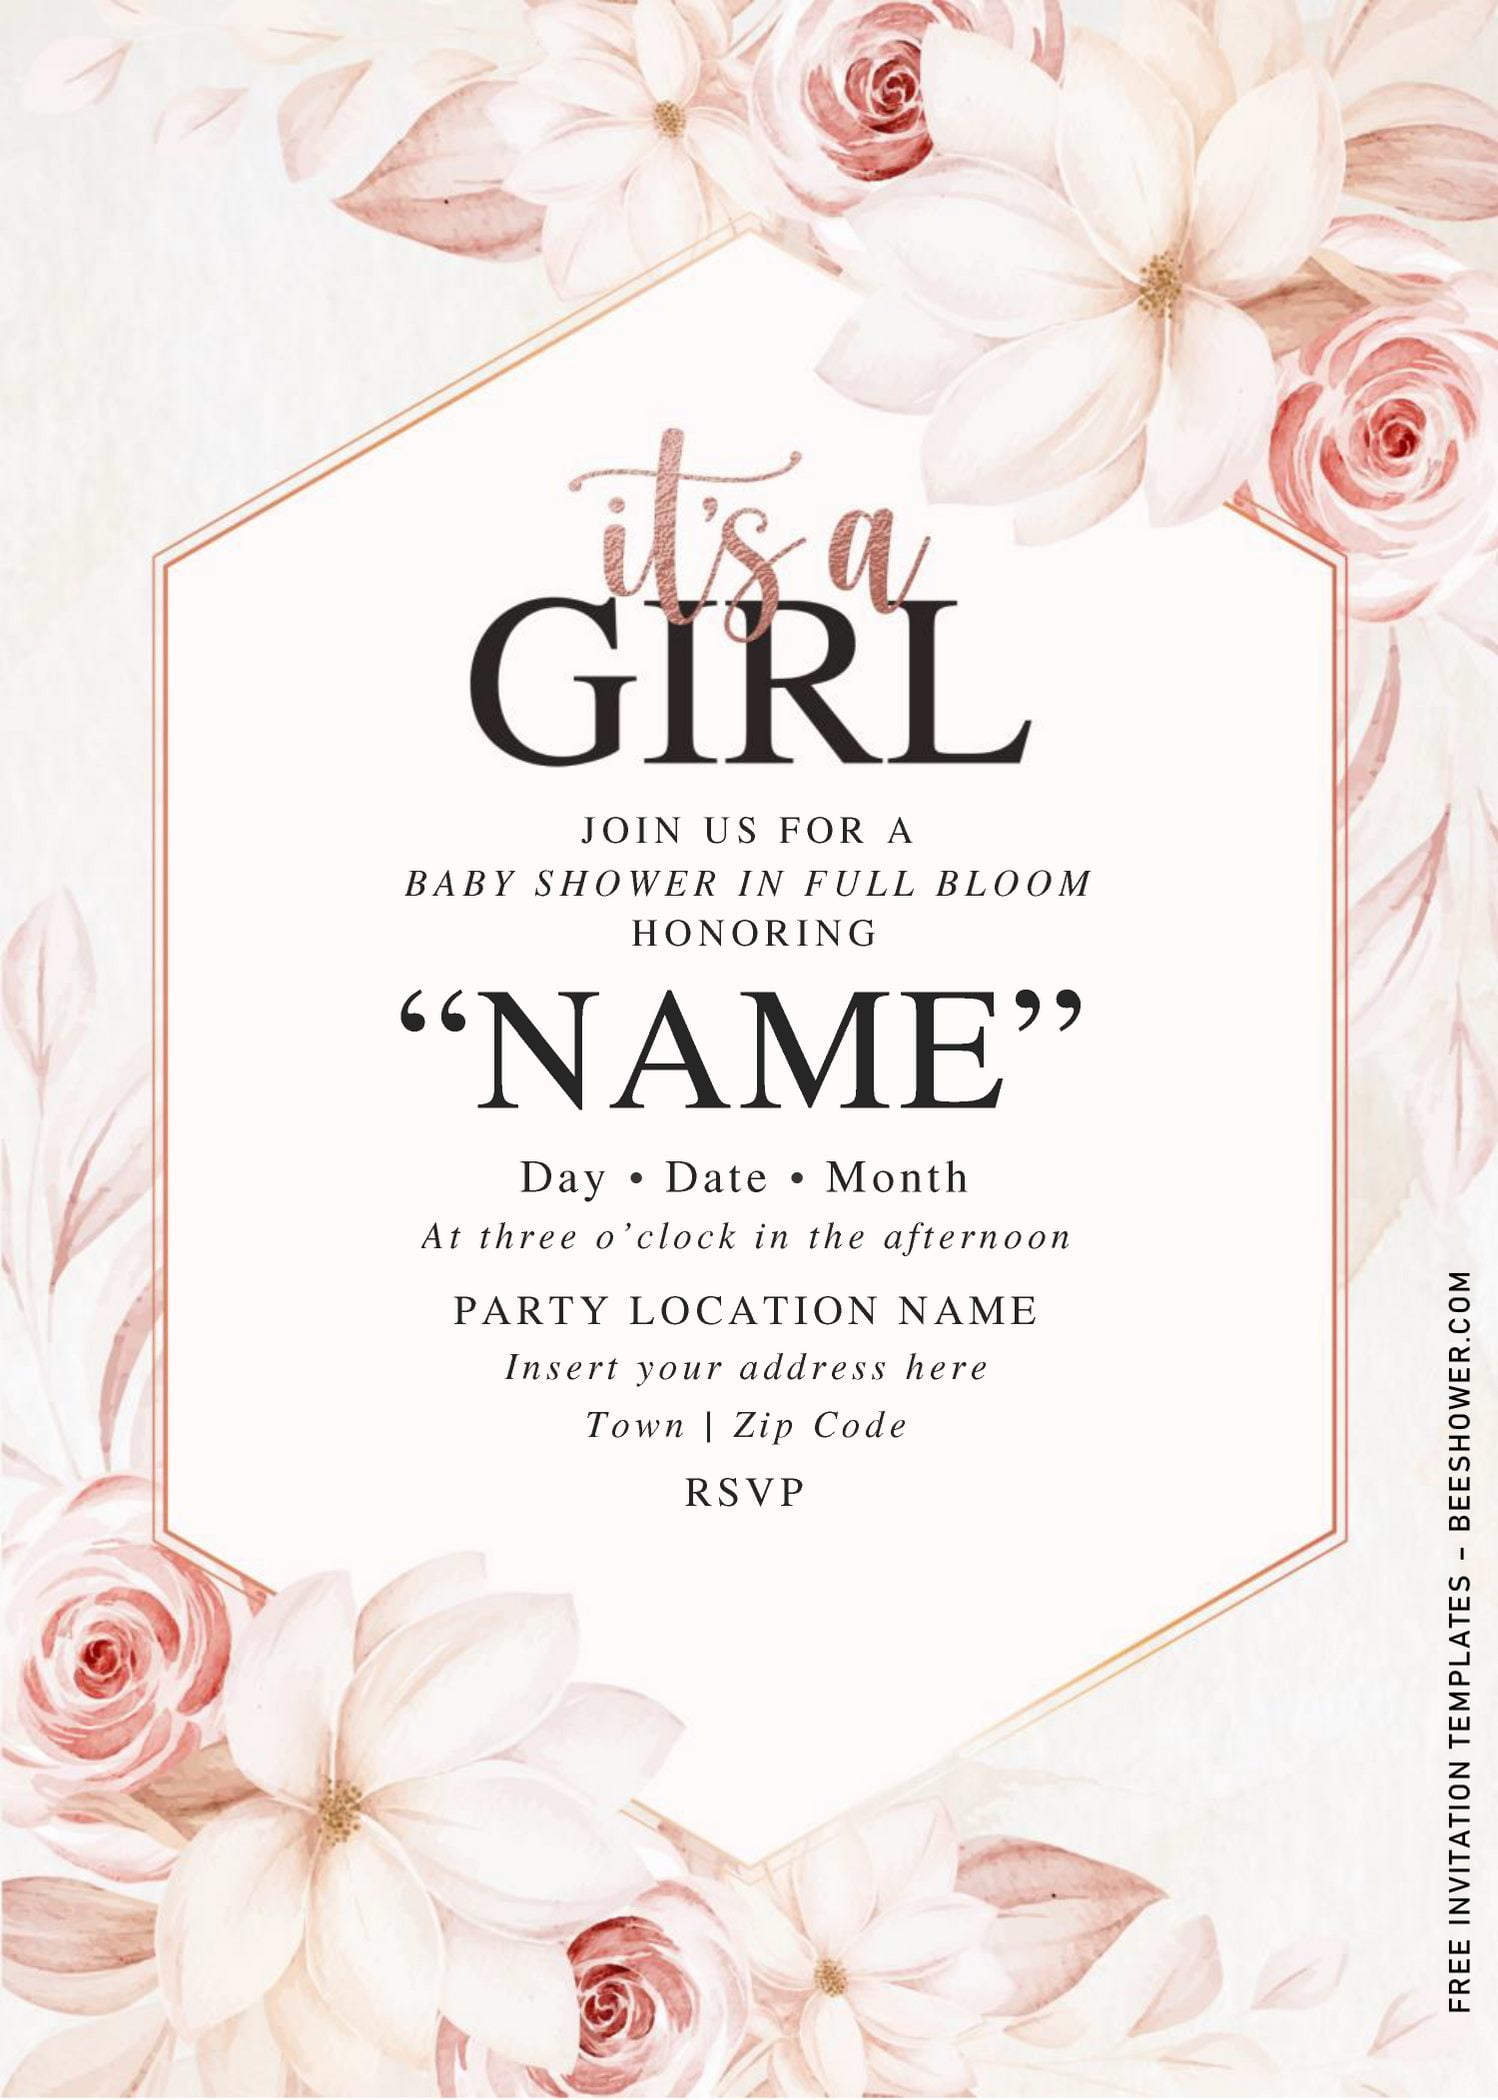 Free Blush Pink Roses Baby Shower Invitation Templates For Word FREE